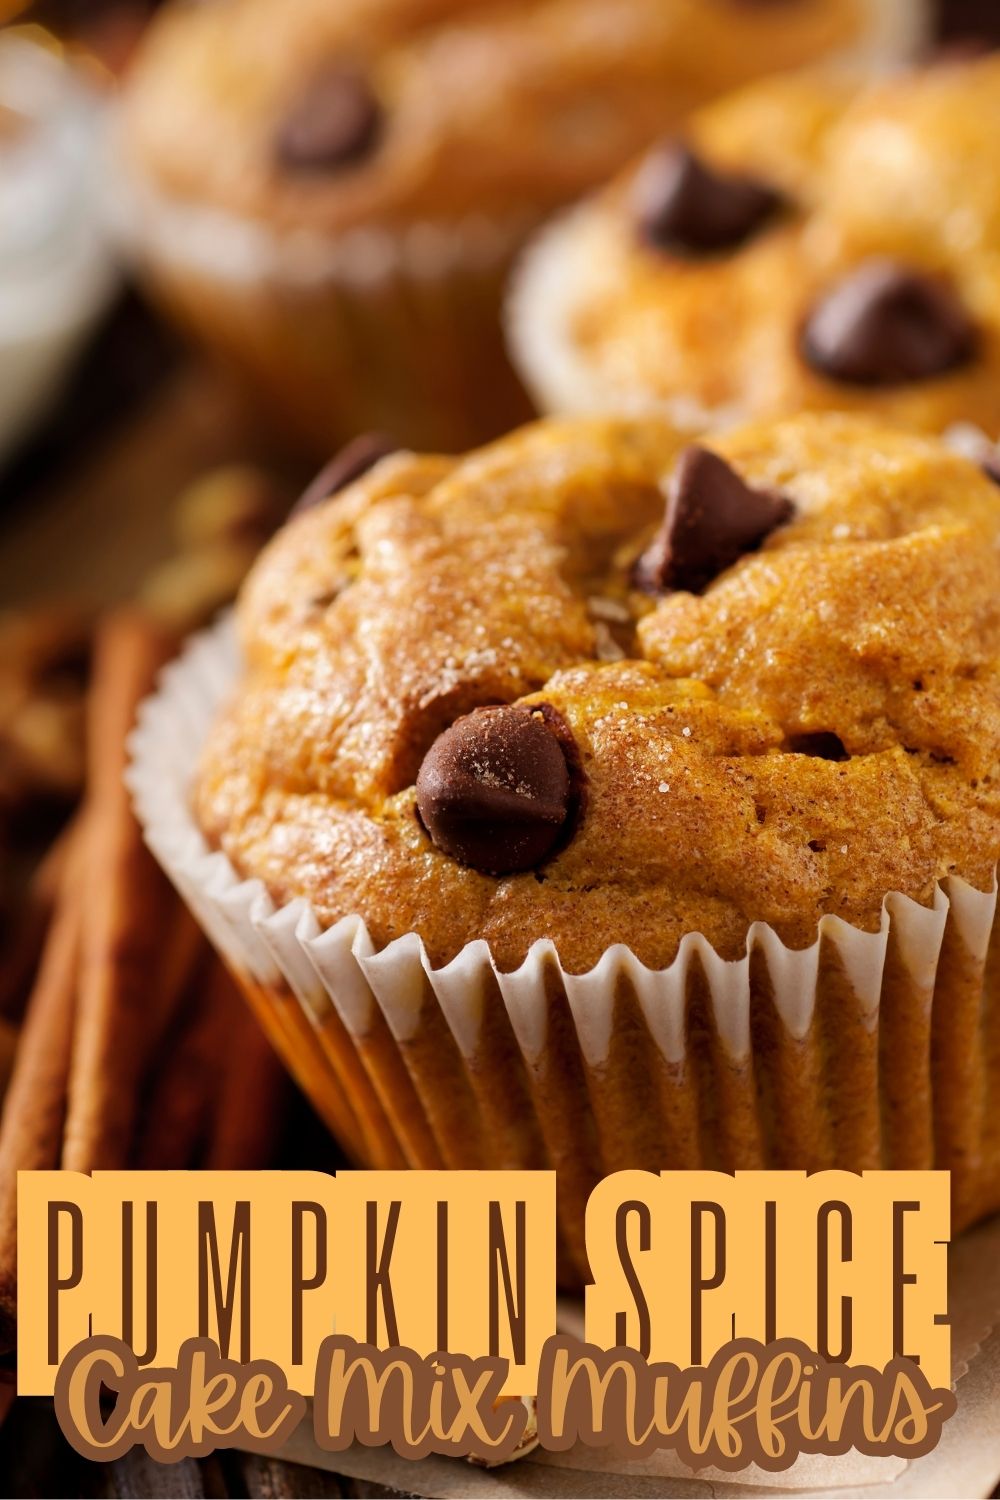 Pumpkin Spice Cake Mix Muffins with Chocolate Chips